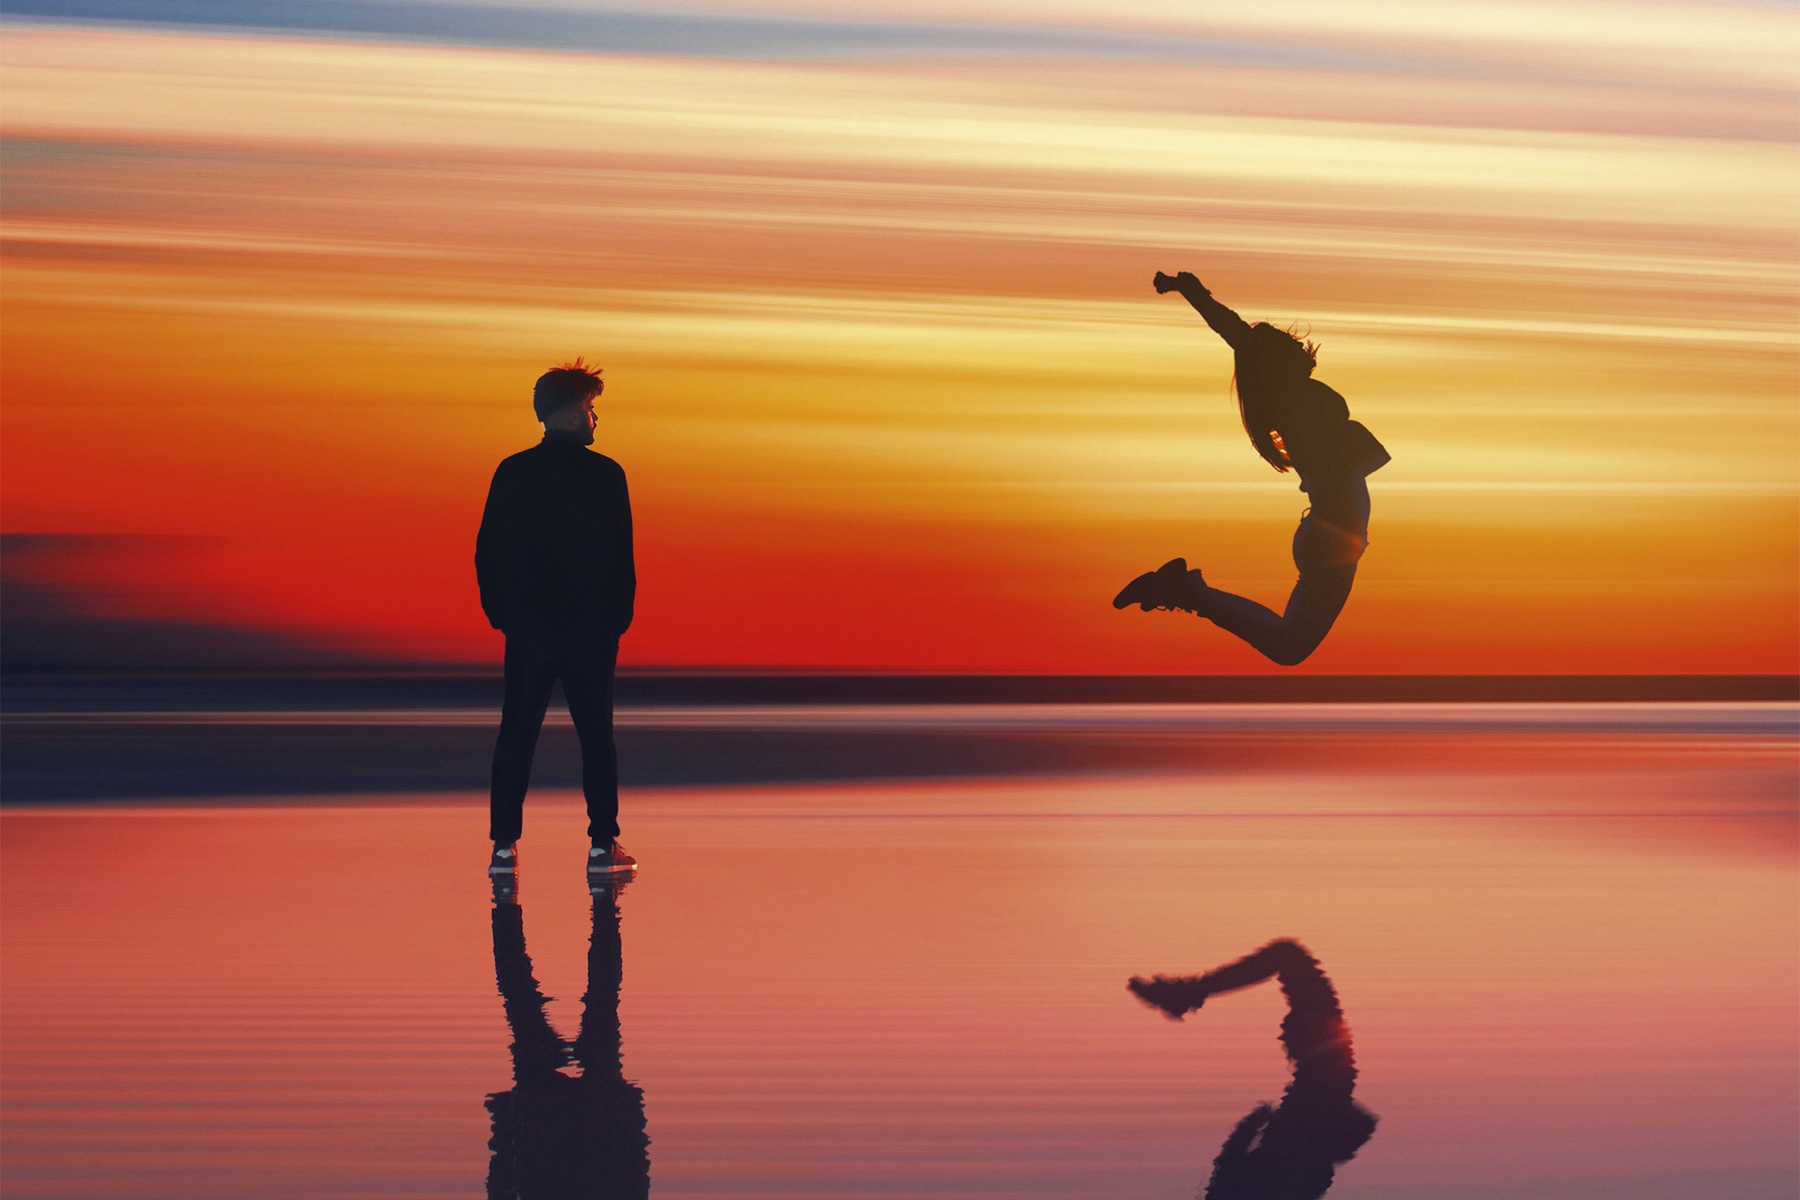 escape 100 winner image of a couple jumping on the beach at sunset